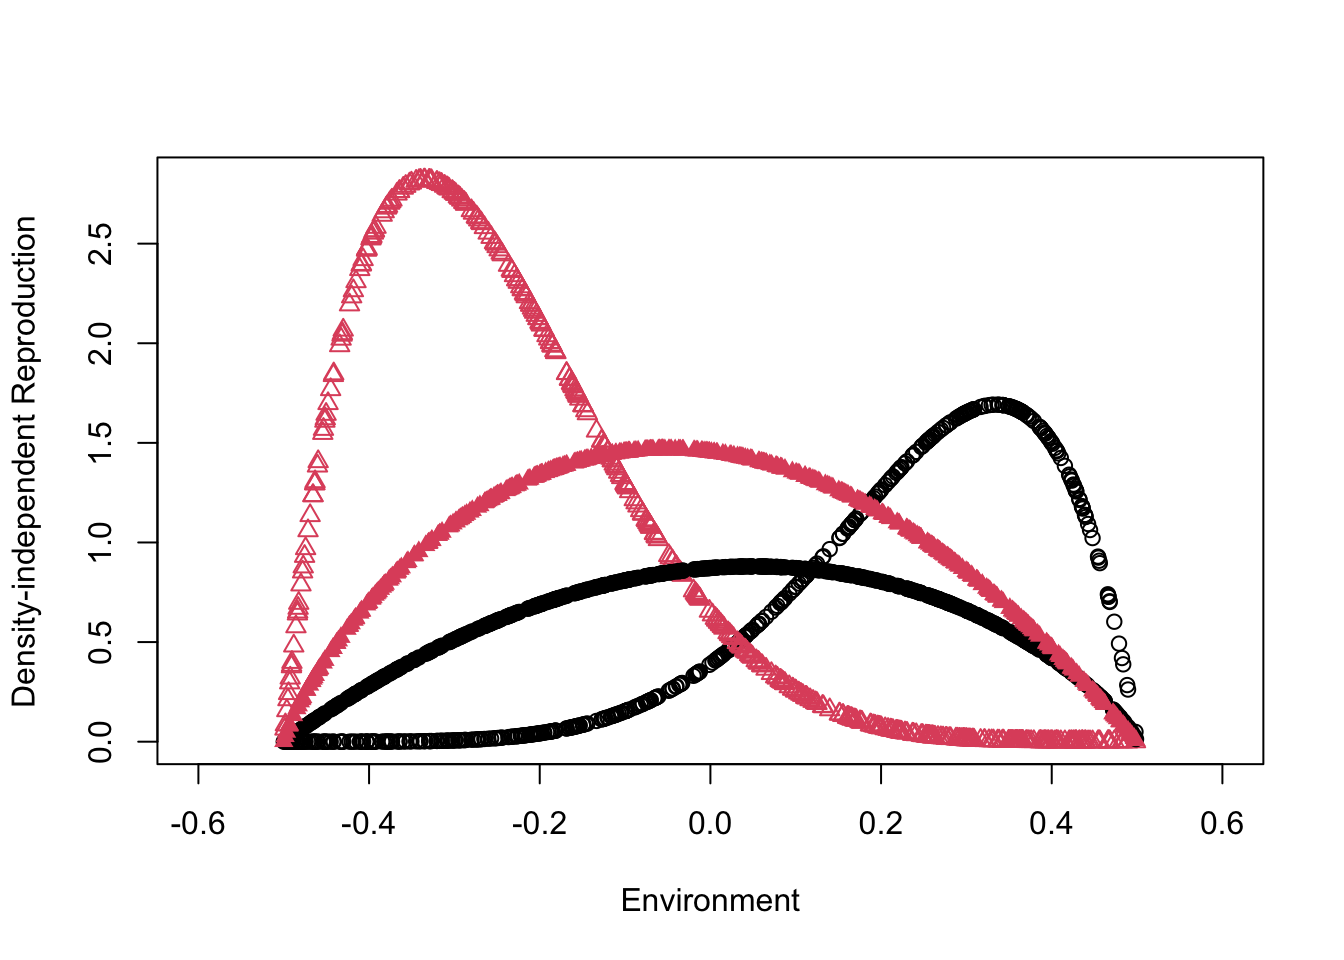 Species responses to the environment, using the `chesson` model. Relative to the pair of species represented by solid circles, the pair of species with open symbols shows greater difference between optimal environments (greater spread}), and narrower niches (greater specialization).  The underlying Beta probability density distributions; the grey *area* under the curves of the more differentiated species is rho, the degree of niche overlap. Density-independent reproduction (the parameter E_[i,t]. (grey vs. red triangles - common species, black circles - rare species; open symbols - highly differentiated species, solid symbols - similar species).